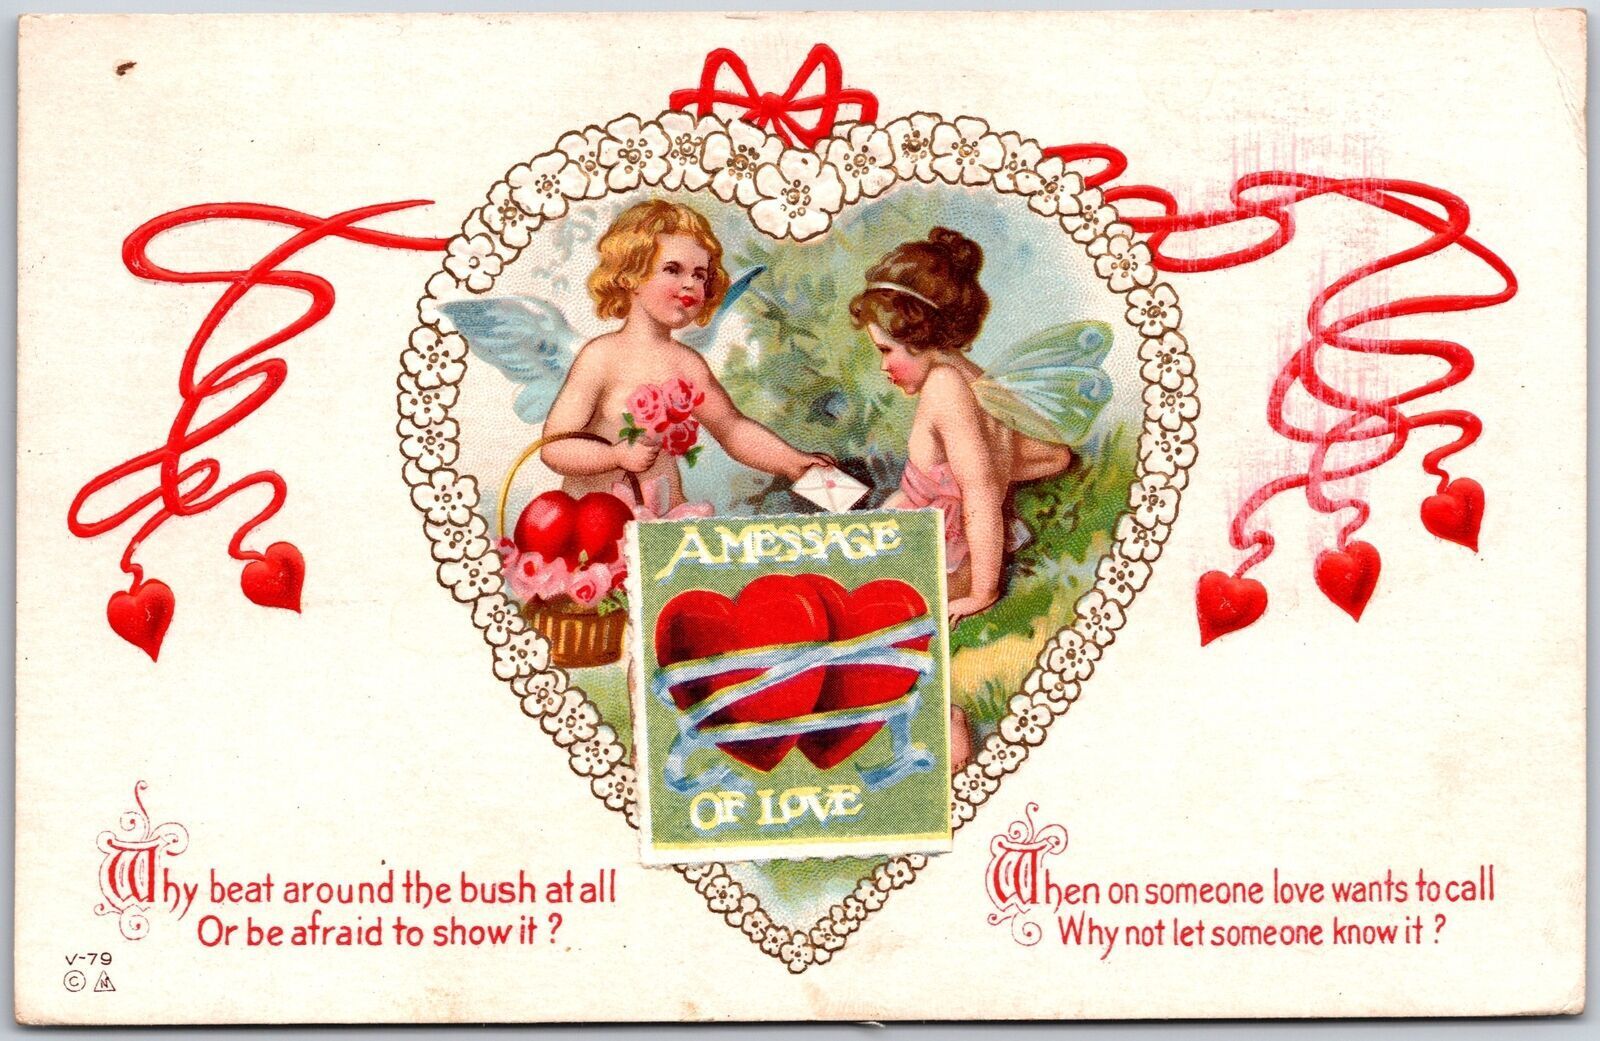 1915 A Message Of Love Cupid Valentines Card Posted Postcard